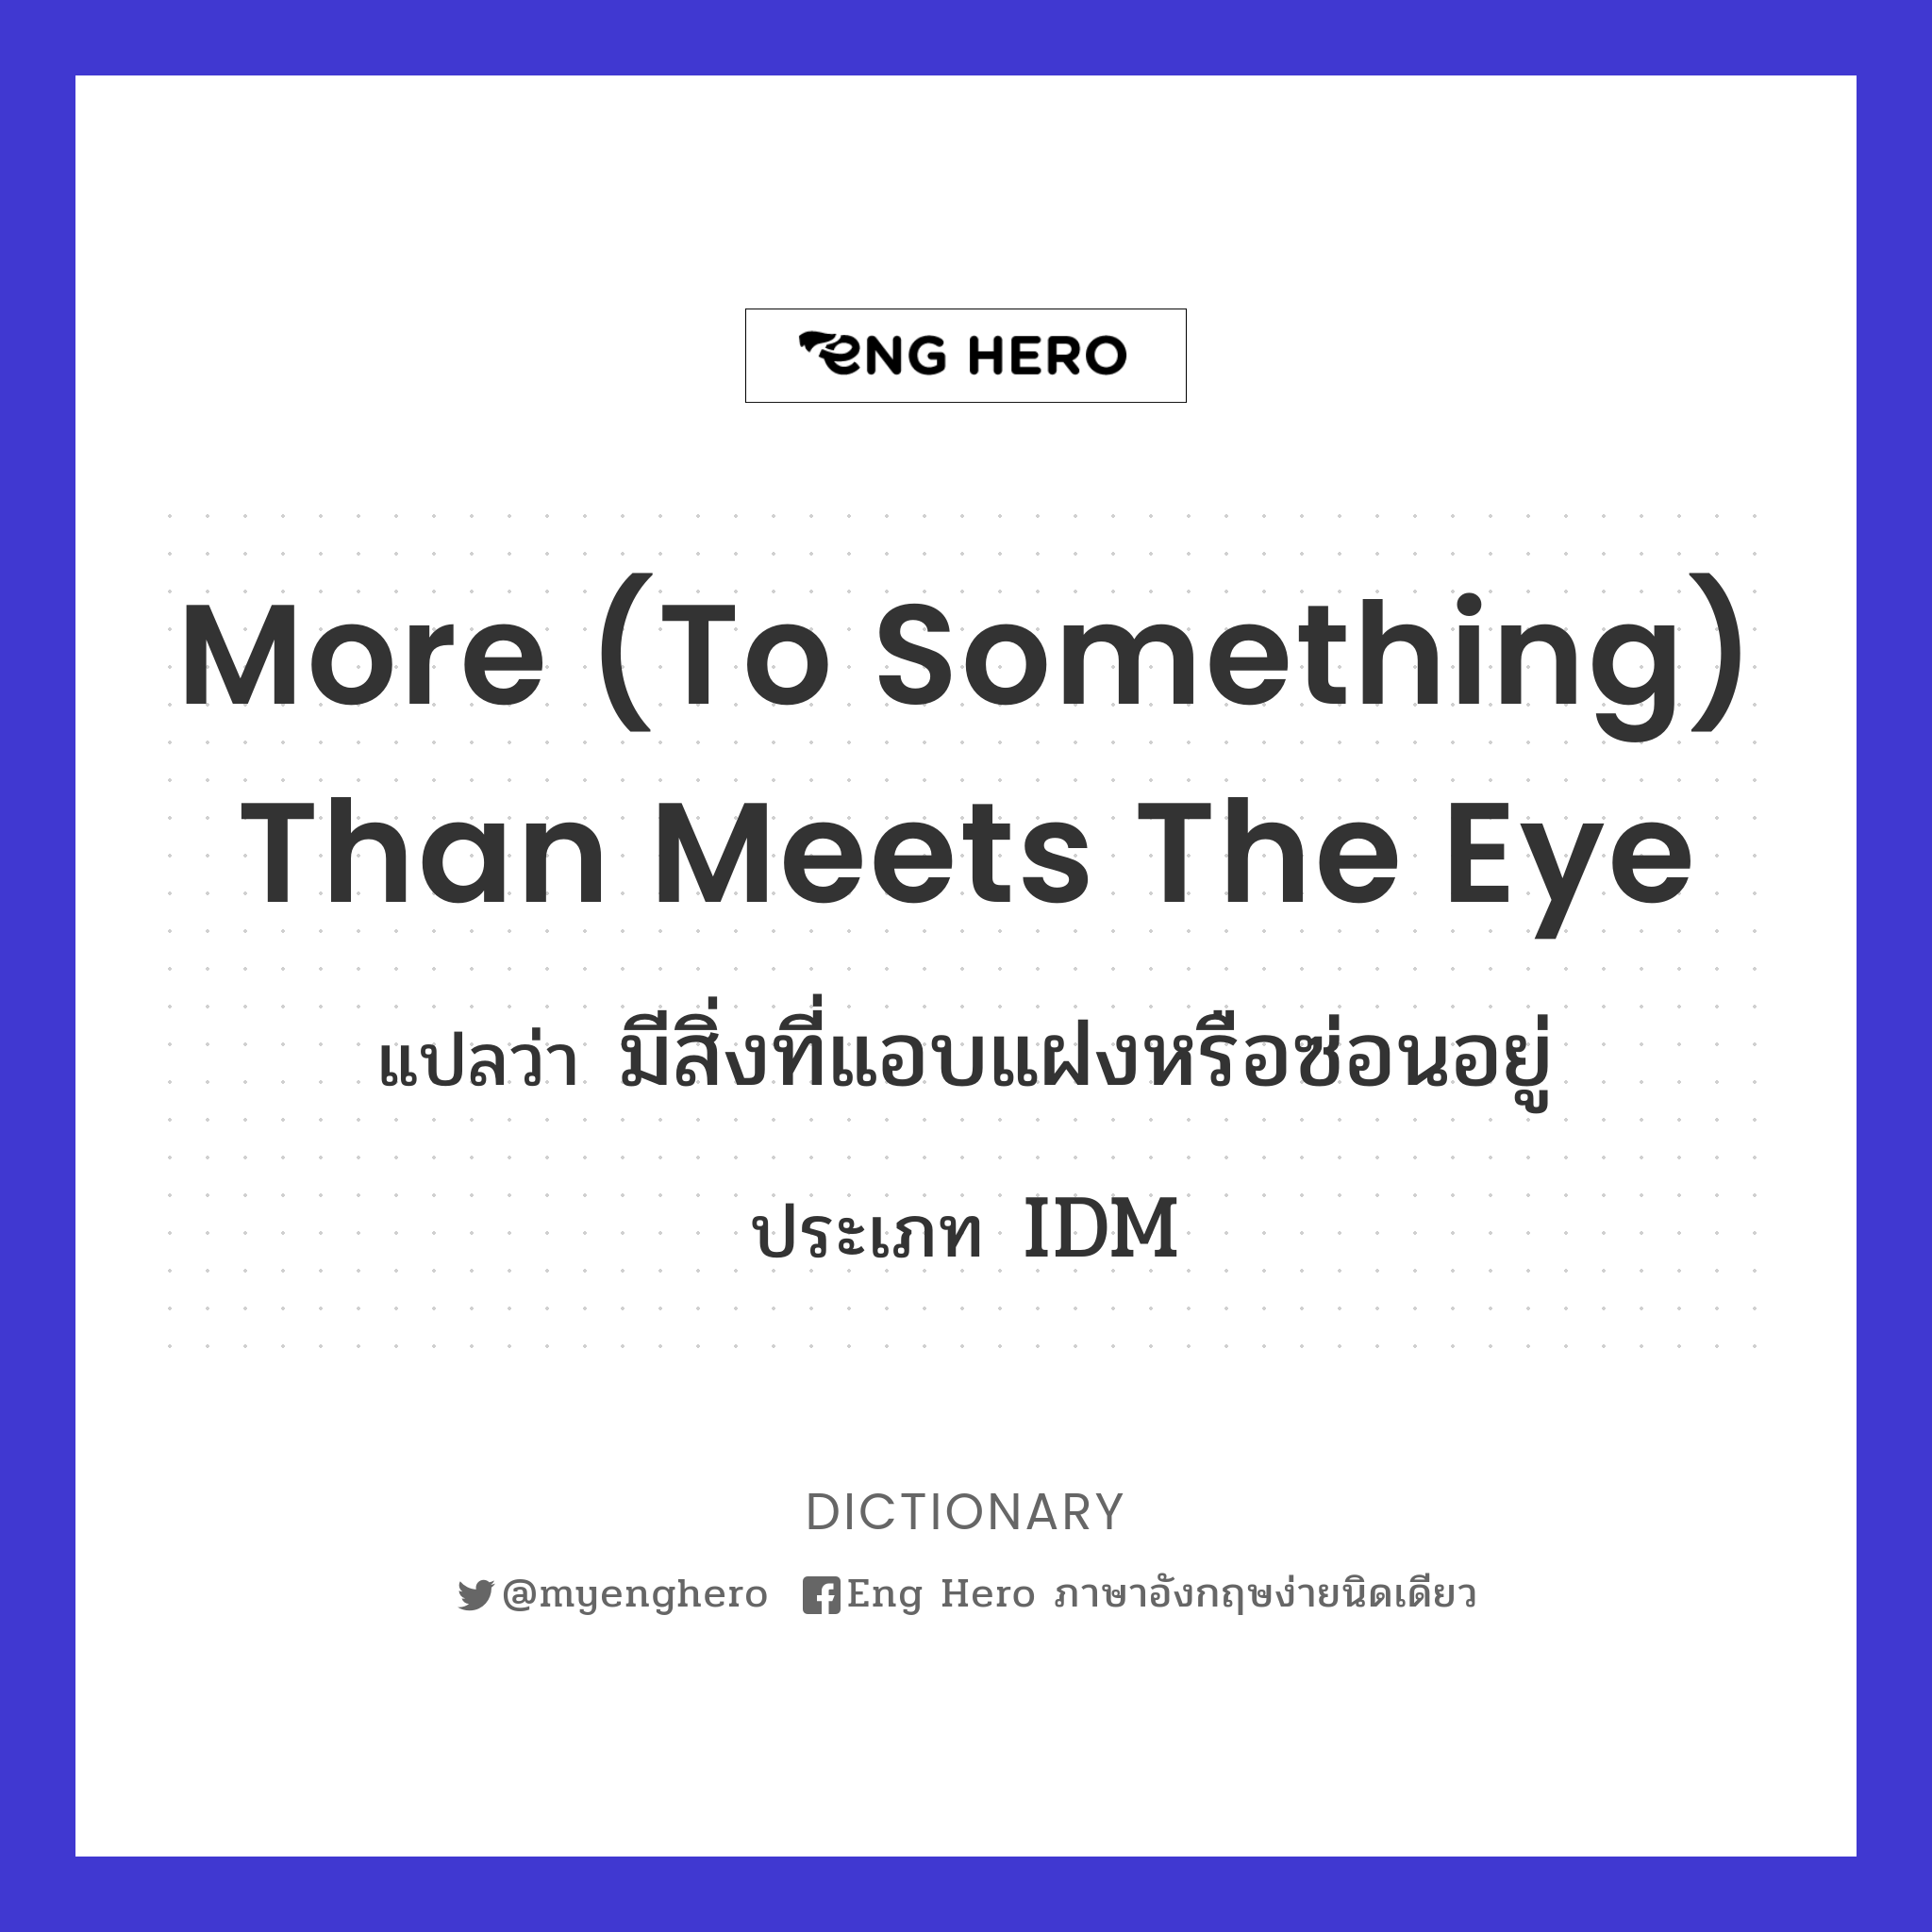 more (to something) than meets the eye